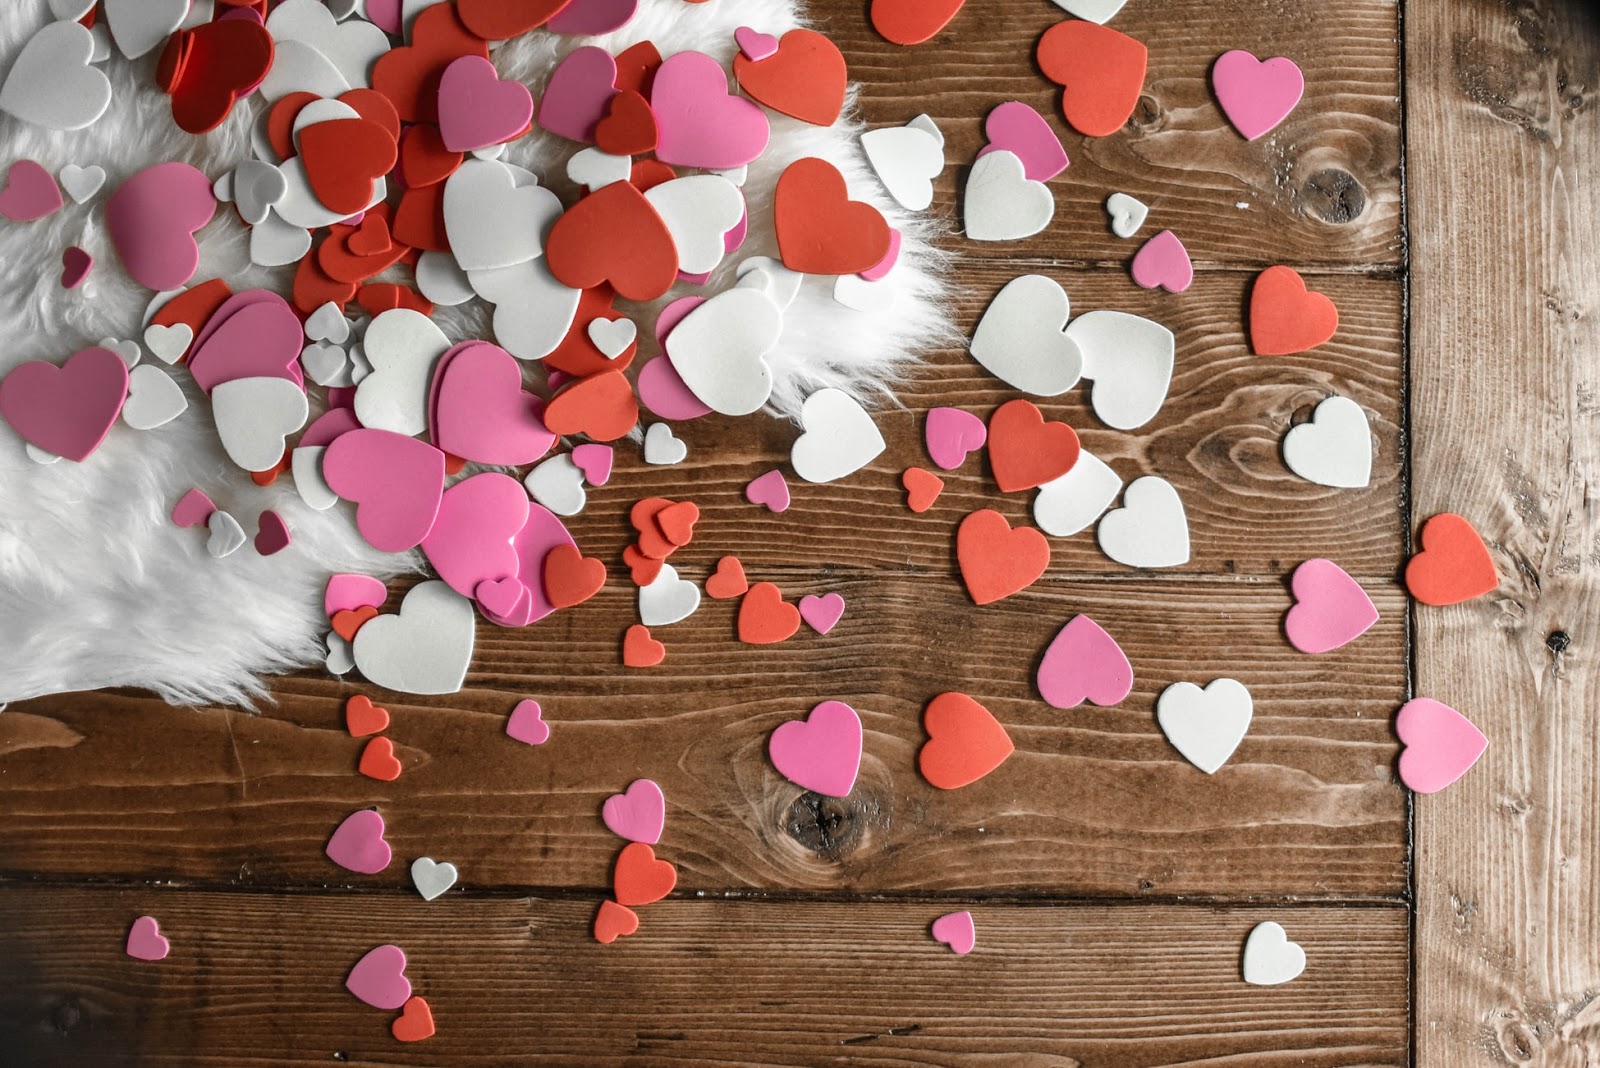 A wooden floor covered in hearts in lots of different sizes, coloured white, pink and red